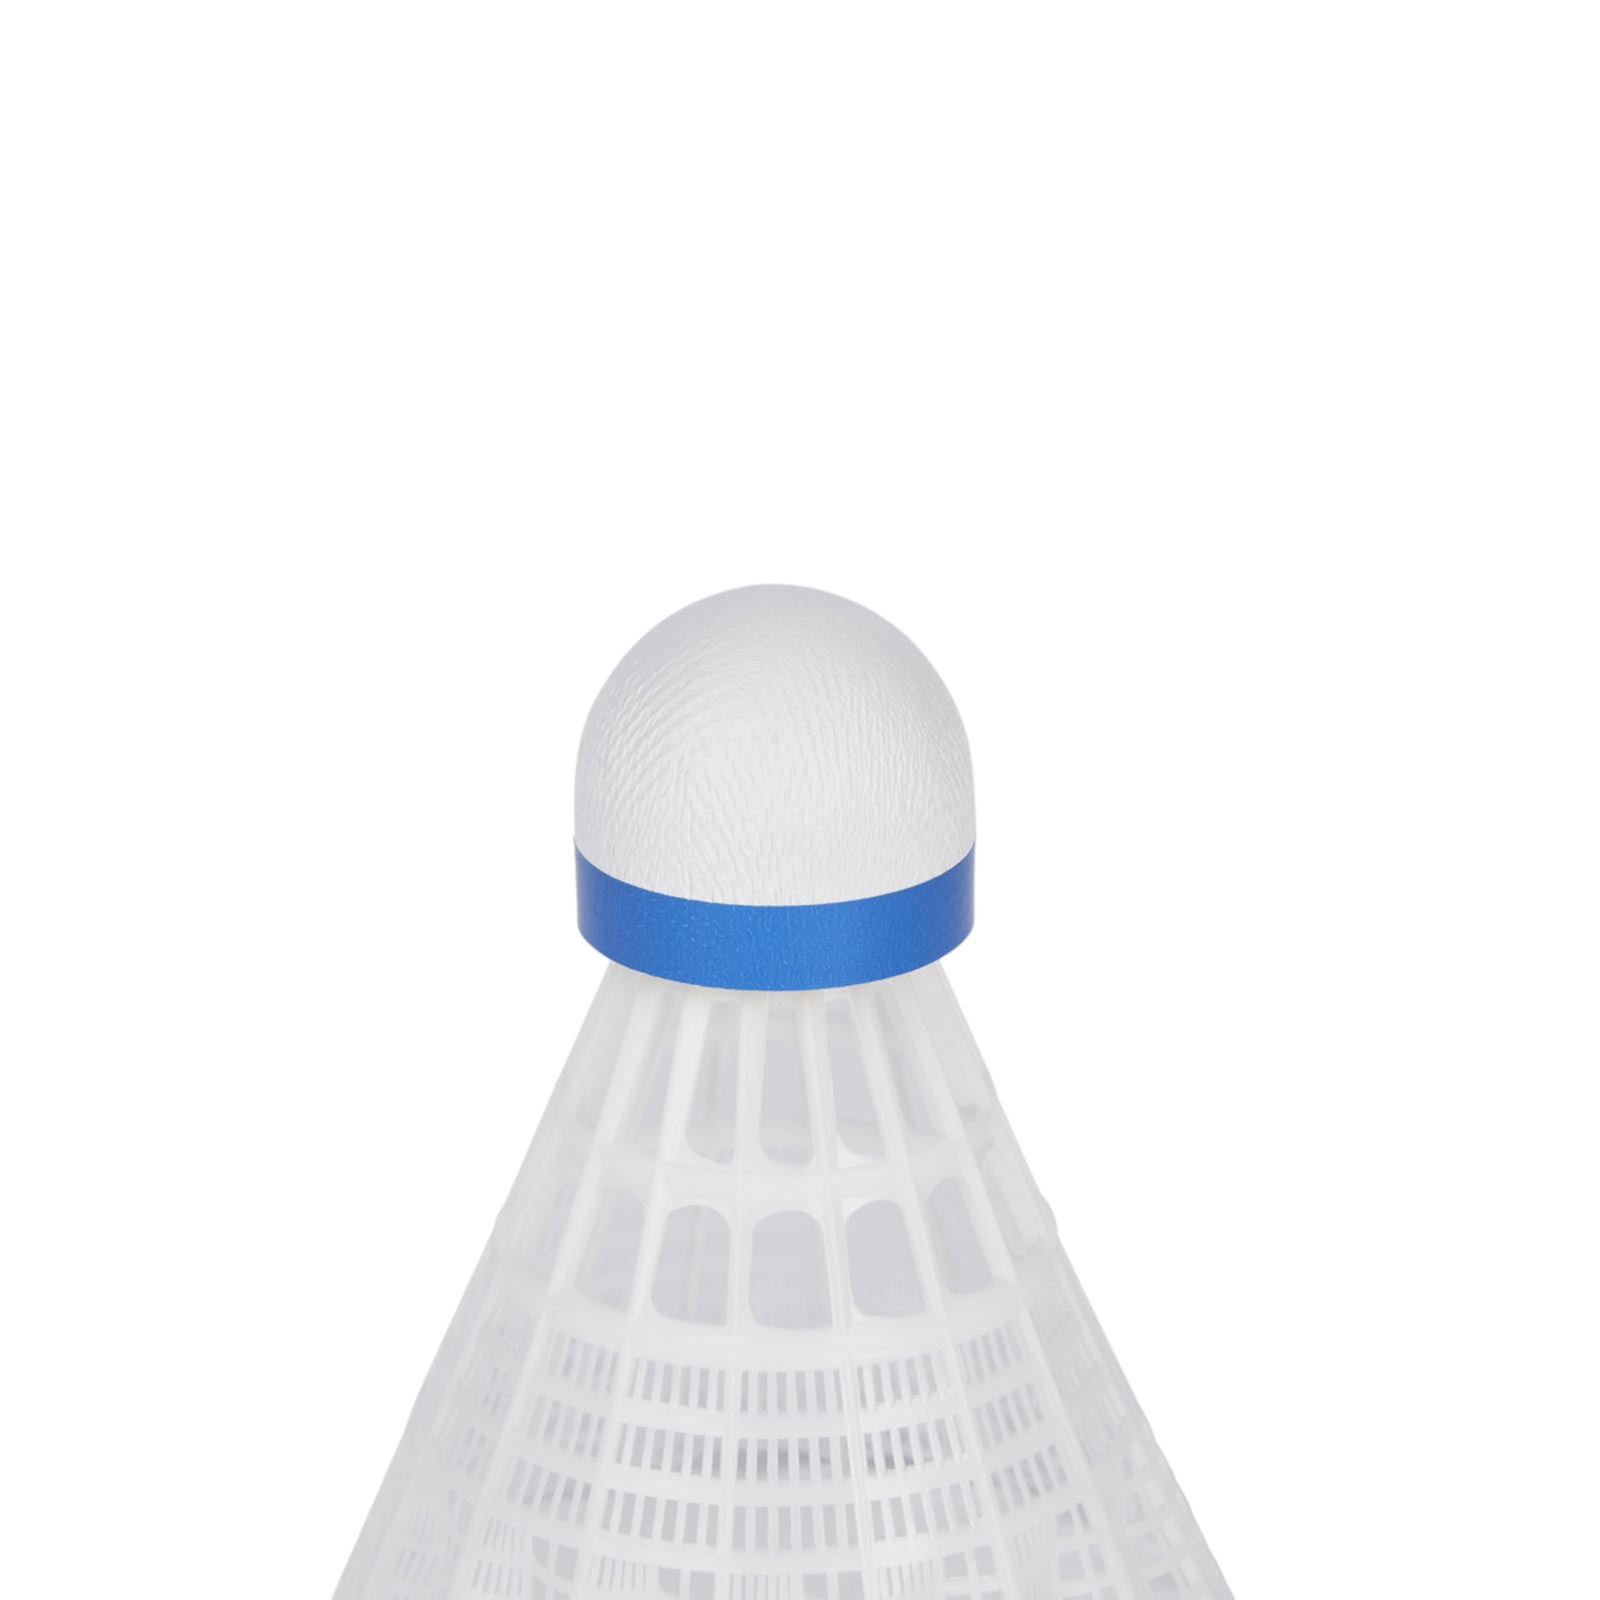 PRO TOUCH SP 400 SHUTTLECOCK - 3 PACK